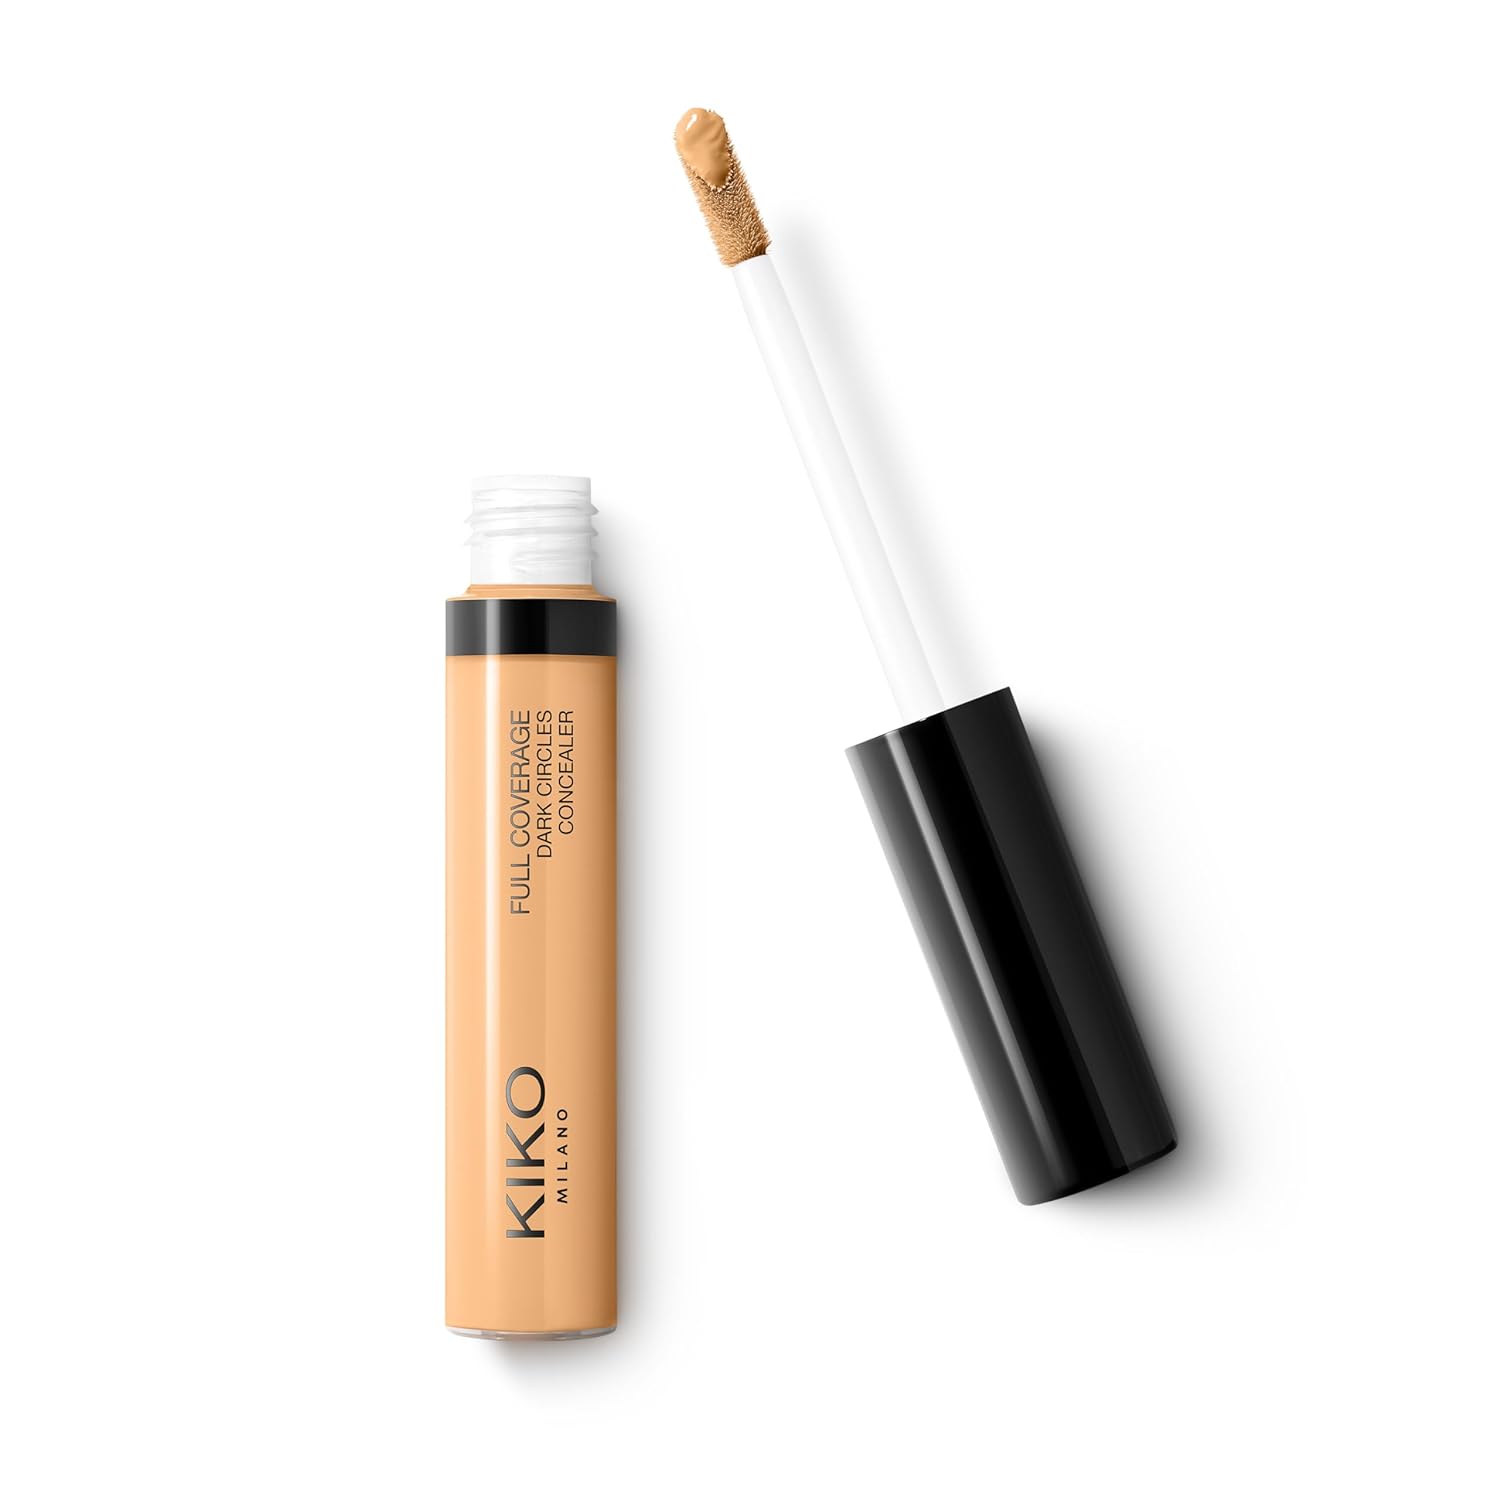 KIKO Milano Full Coverage Dark Circles Concealer 19, liquid concealer for the eye area and face with high coverage